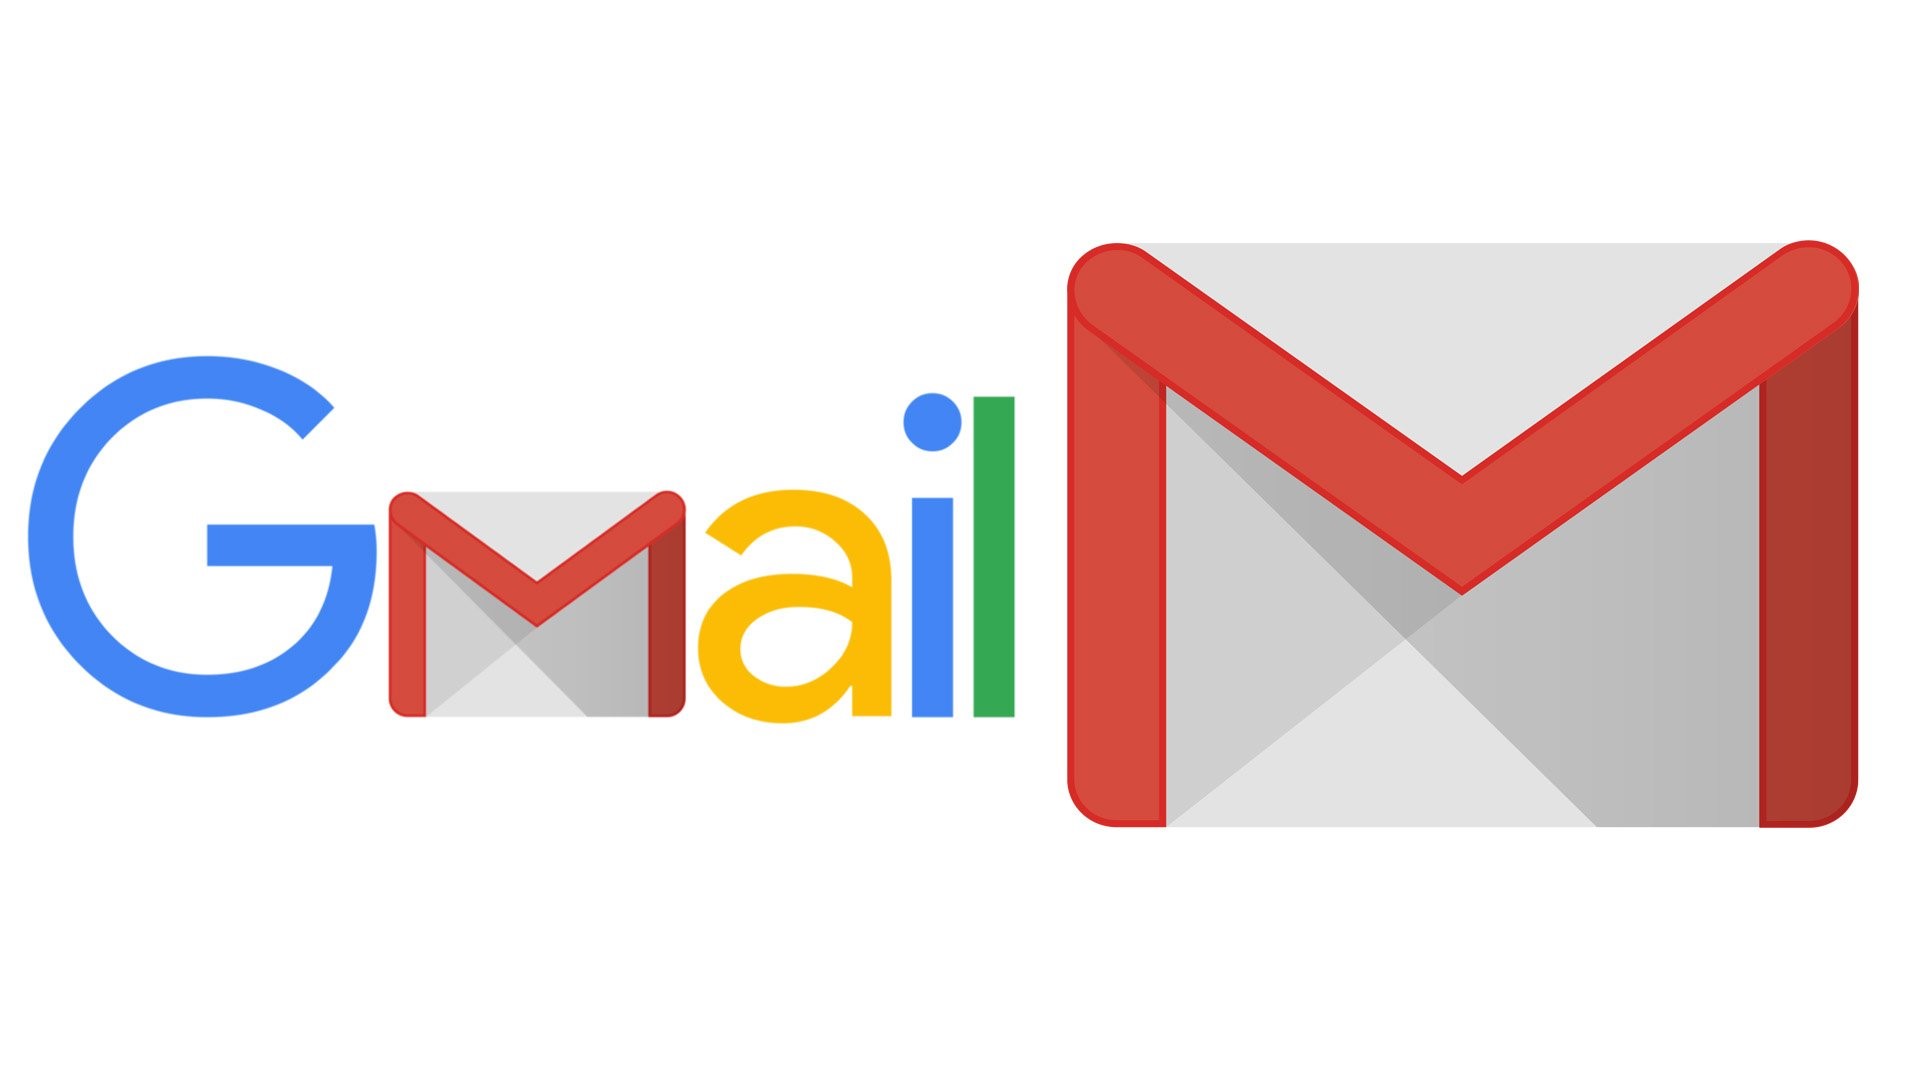 What’s So Great About Gmail?